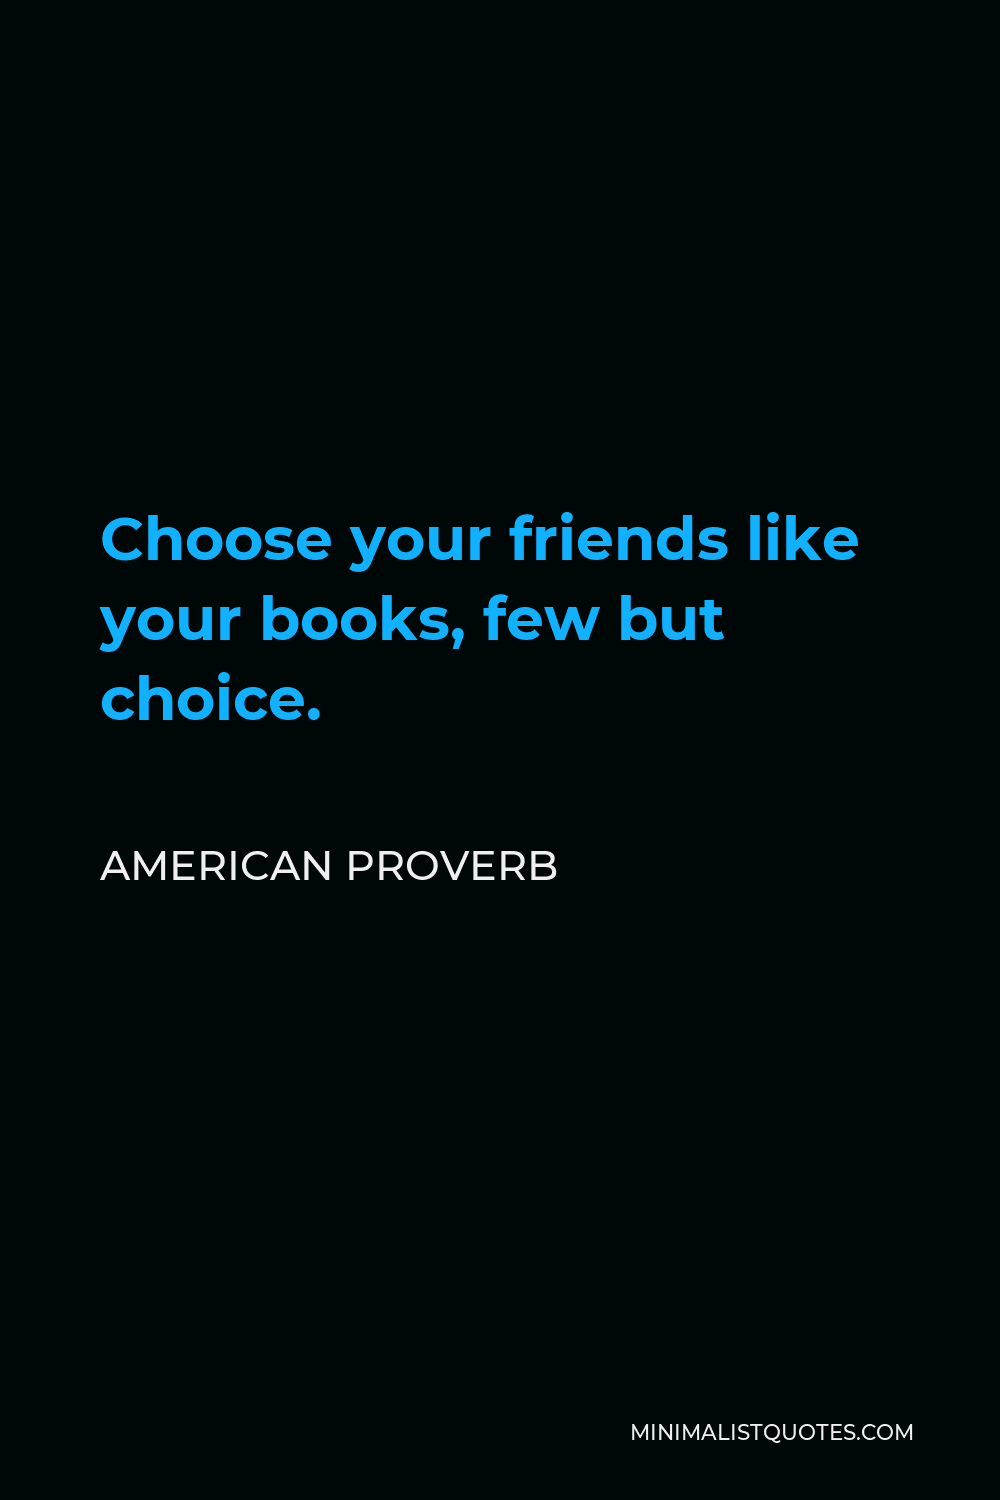 American Proverb Quote - Choose your friends like your books, few but choice.